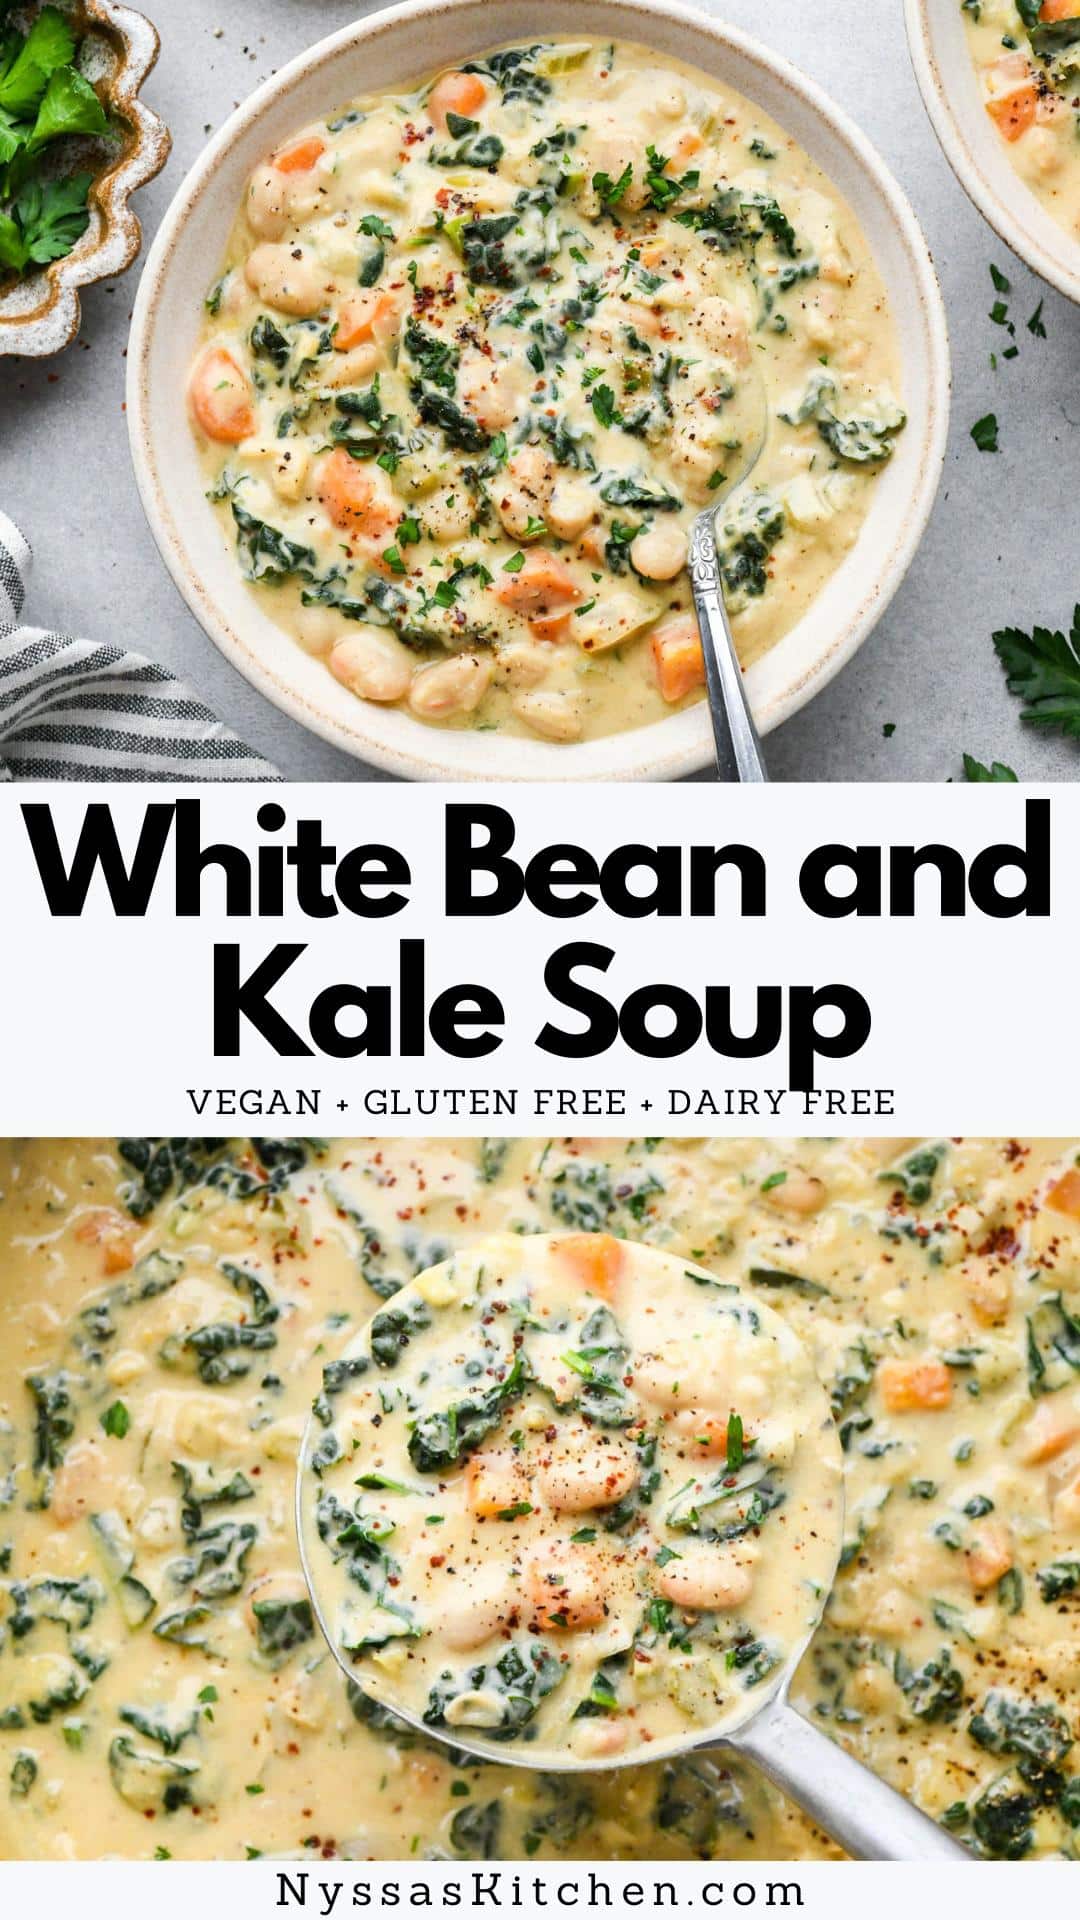 If you're looking for a tasty and nutritious meal that's also dairy-free, look no further than this healthy white bean and kale soup! Packed with veggies and wholesome cannellini beans, this soup is perfect for meal prep or a quick family dinner. And with its rich, creamy texture and comforting flavors, you won't even miss the dairy! Vegan and gluten free.